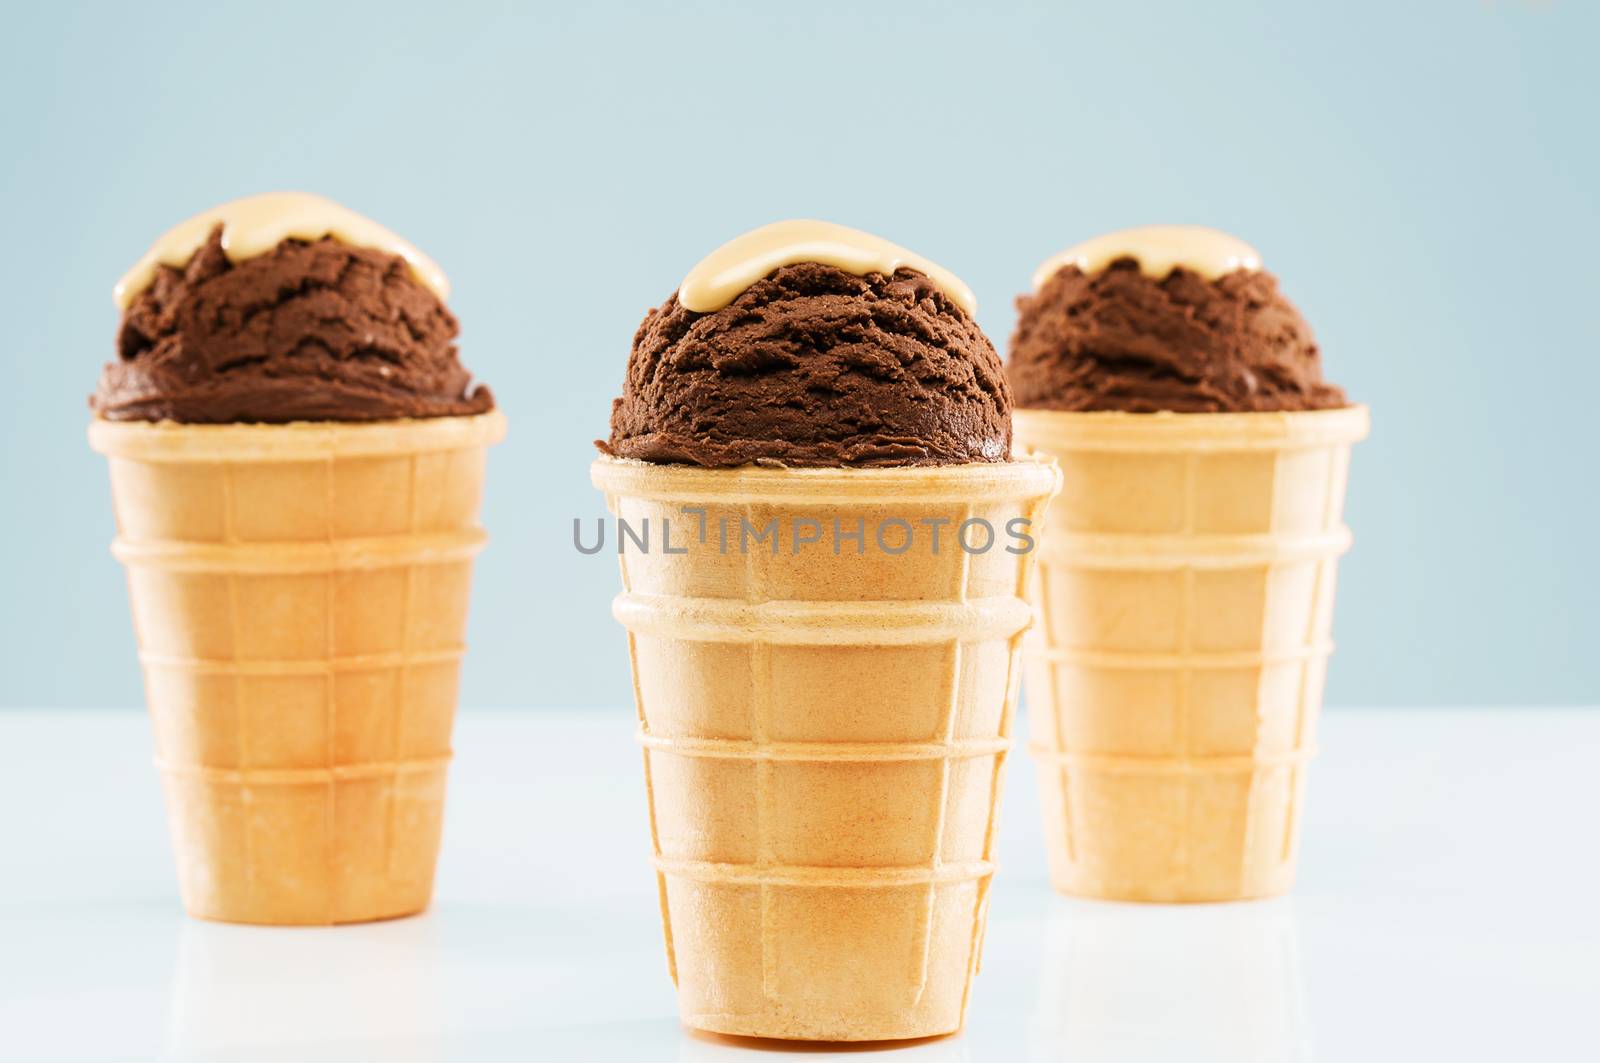 three chocolate ice cream scoops with vanilla sauce in standing waffle cones